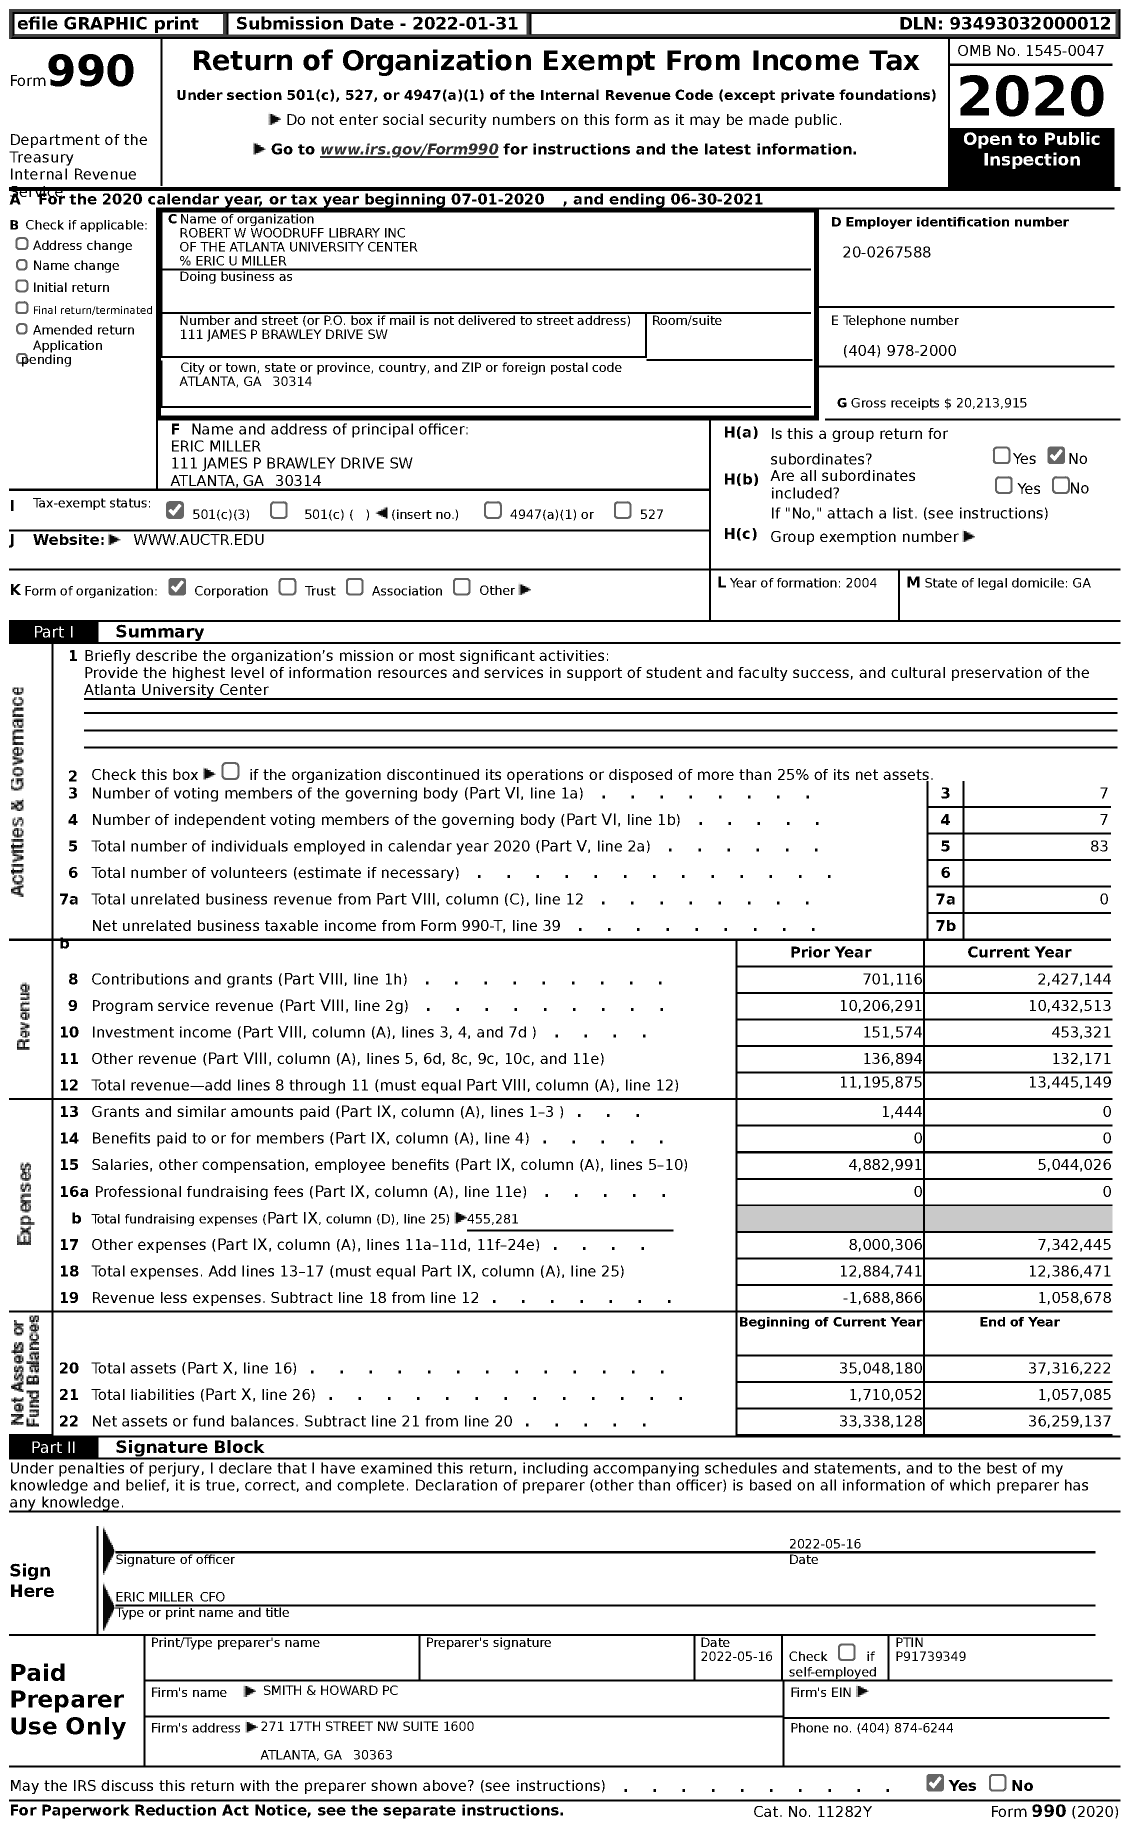 Image of first page of 2020 Form 990 for the Robert W Woodruff Library of the Atlanta University Center (AUC)